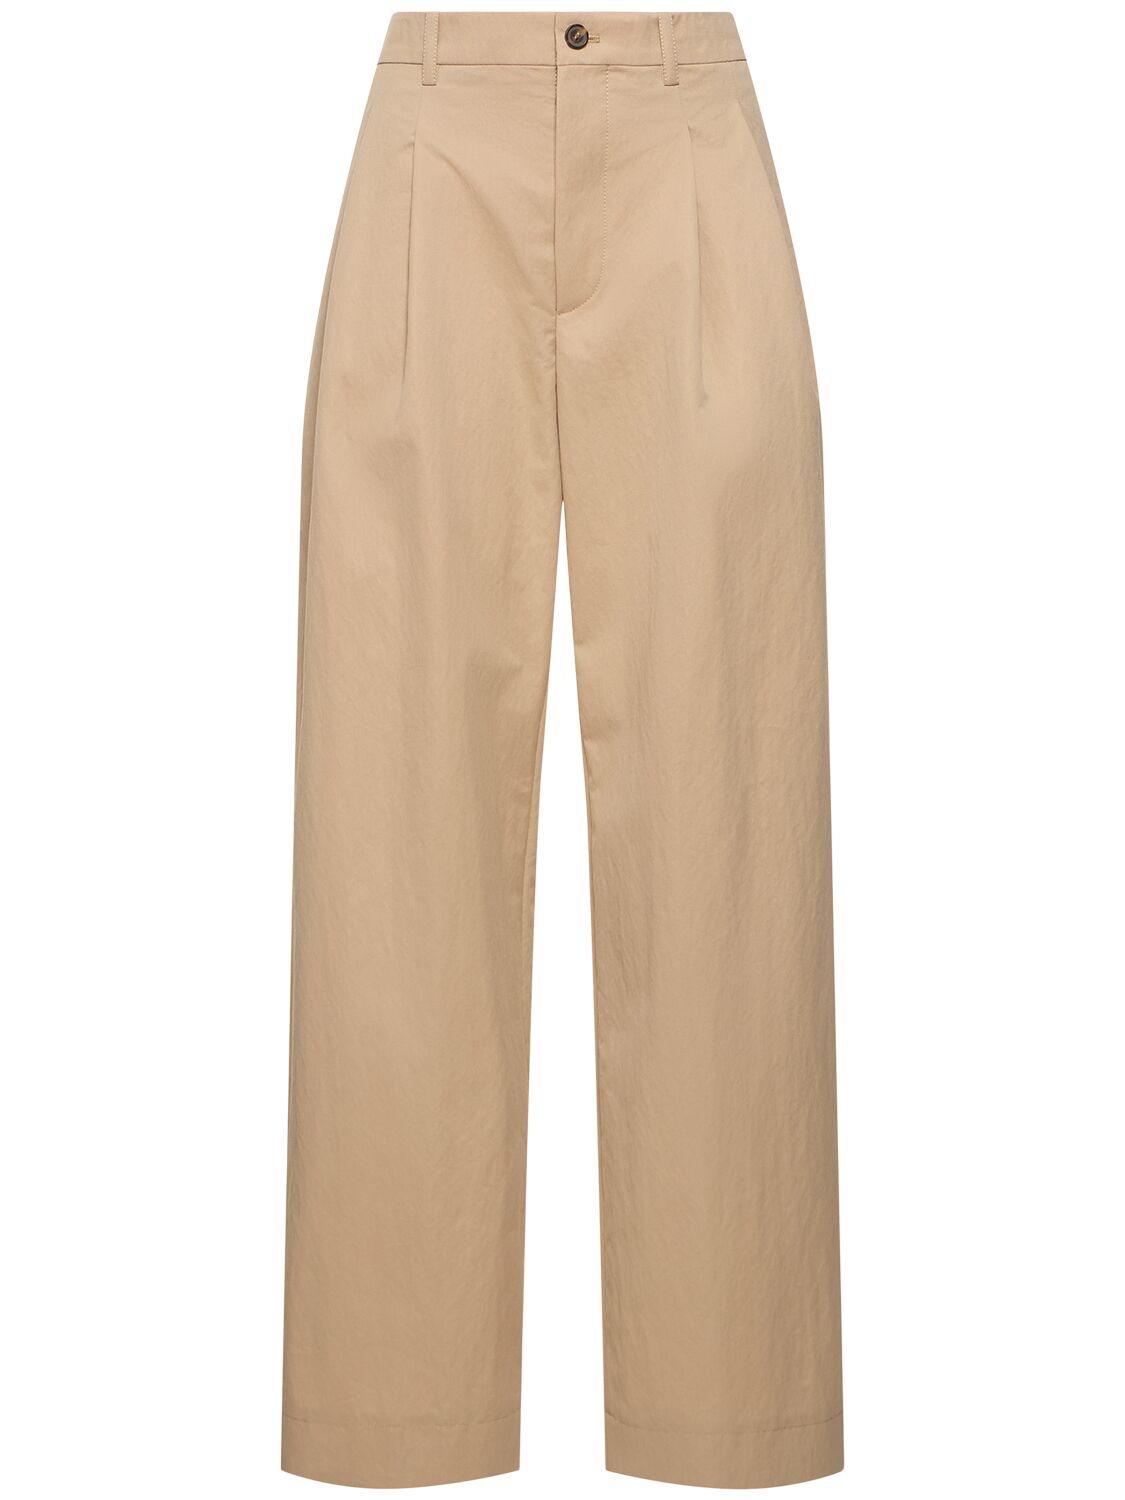 Cotton Blend Drill Wide Chino Pants